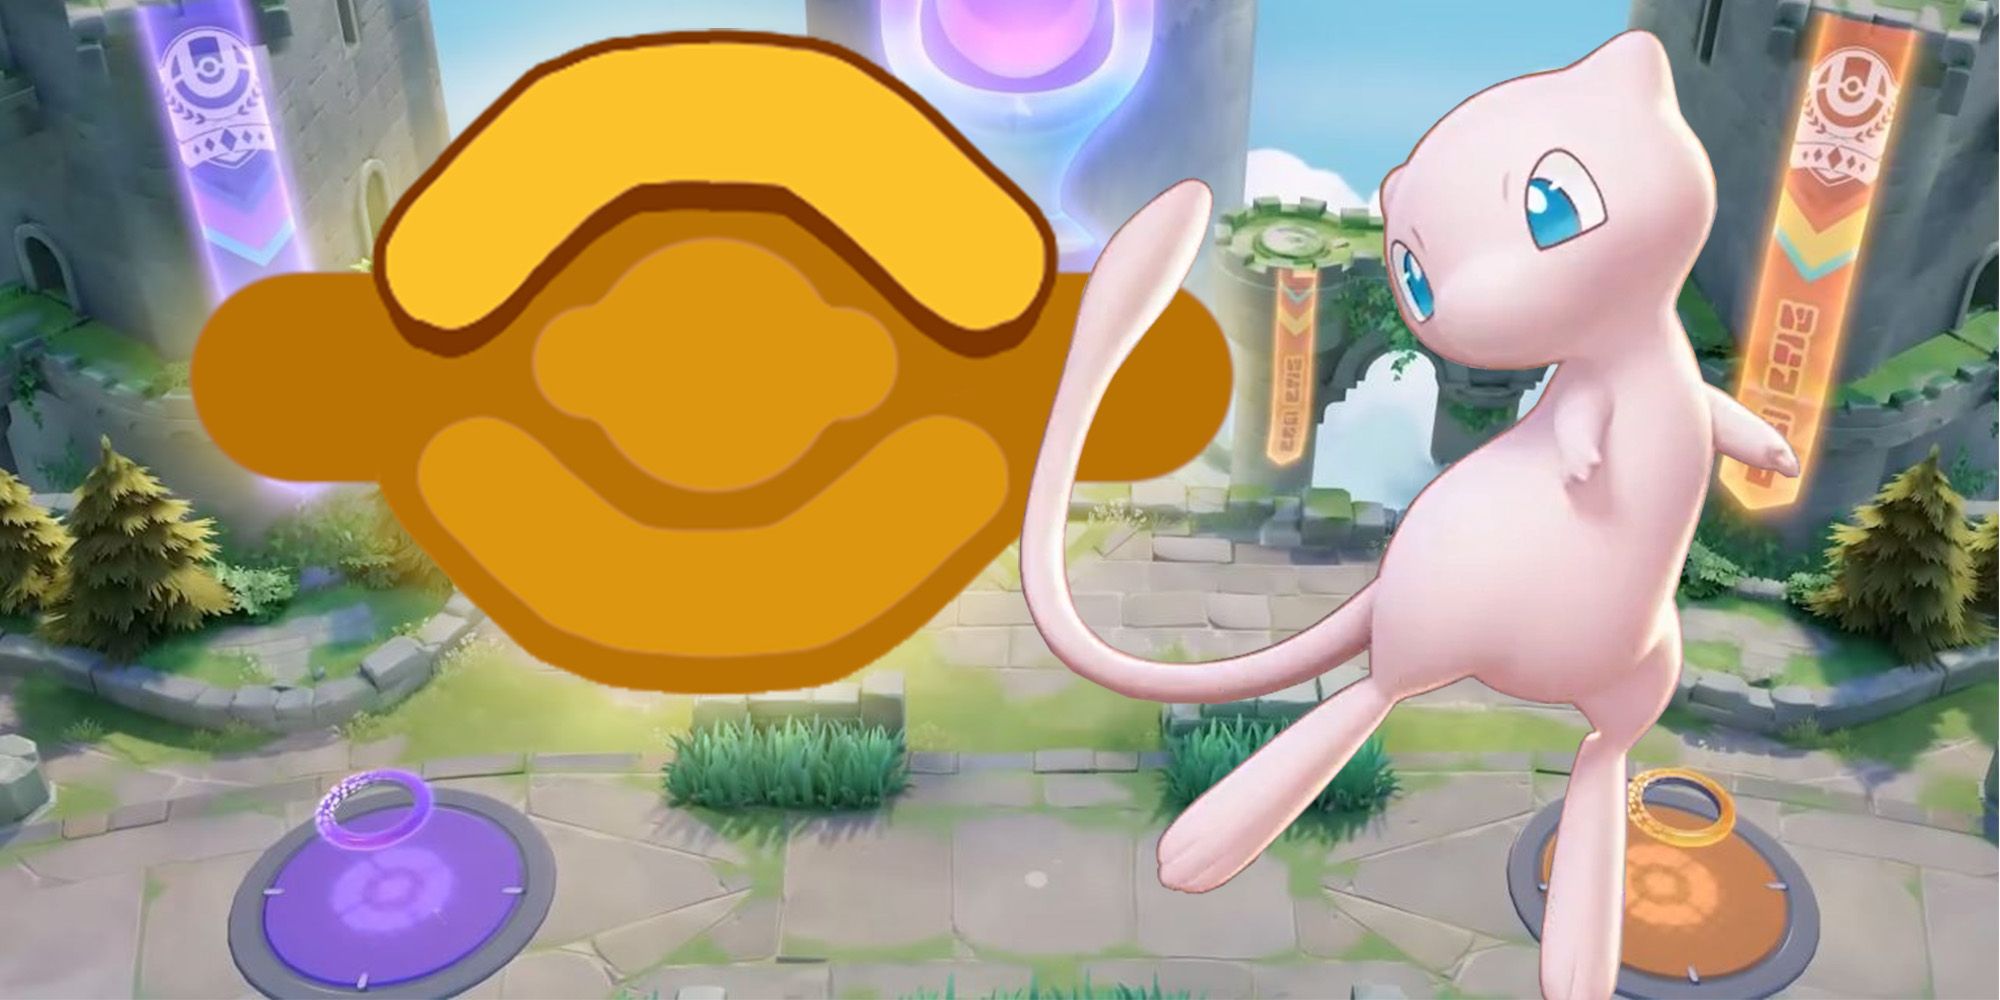 How to play MEW in Pokemon Unite Ultimate Guide 